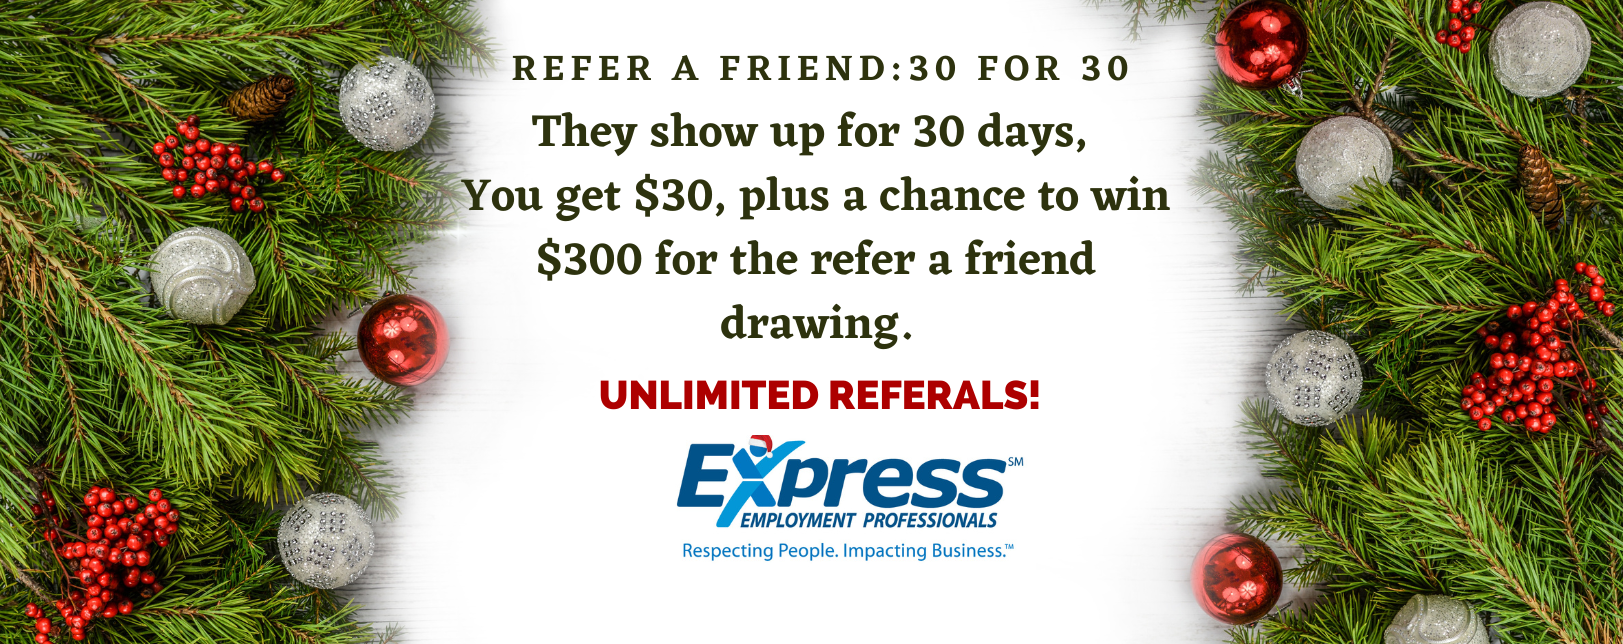 Refer a Friend 30 for 30